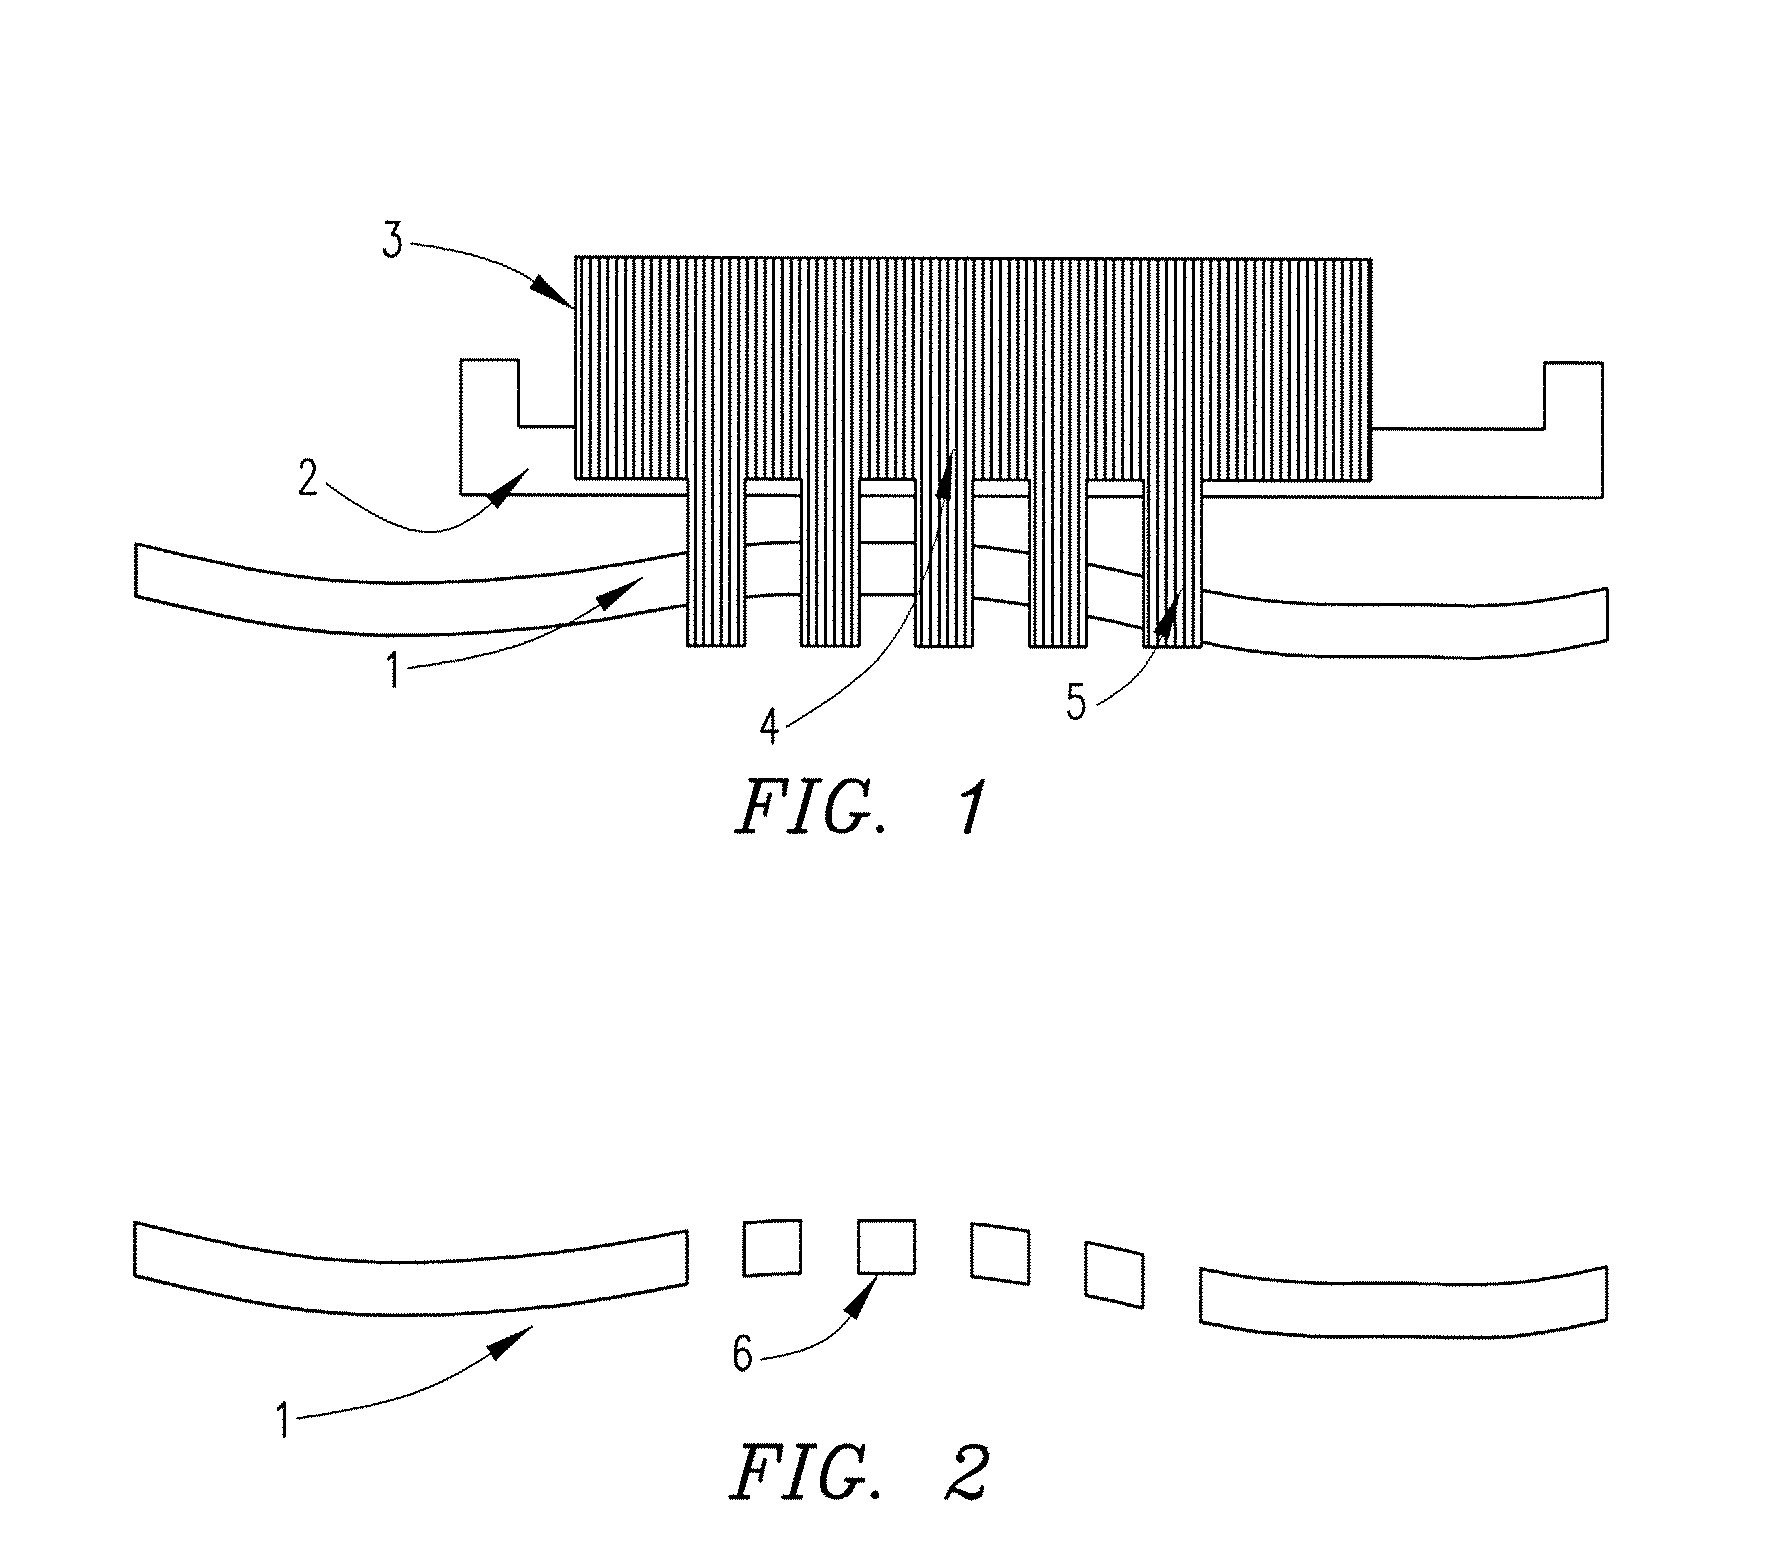 Device and method for manufacturing a particulate filter with regularly spaced micropores